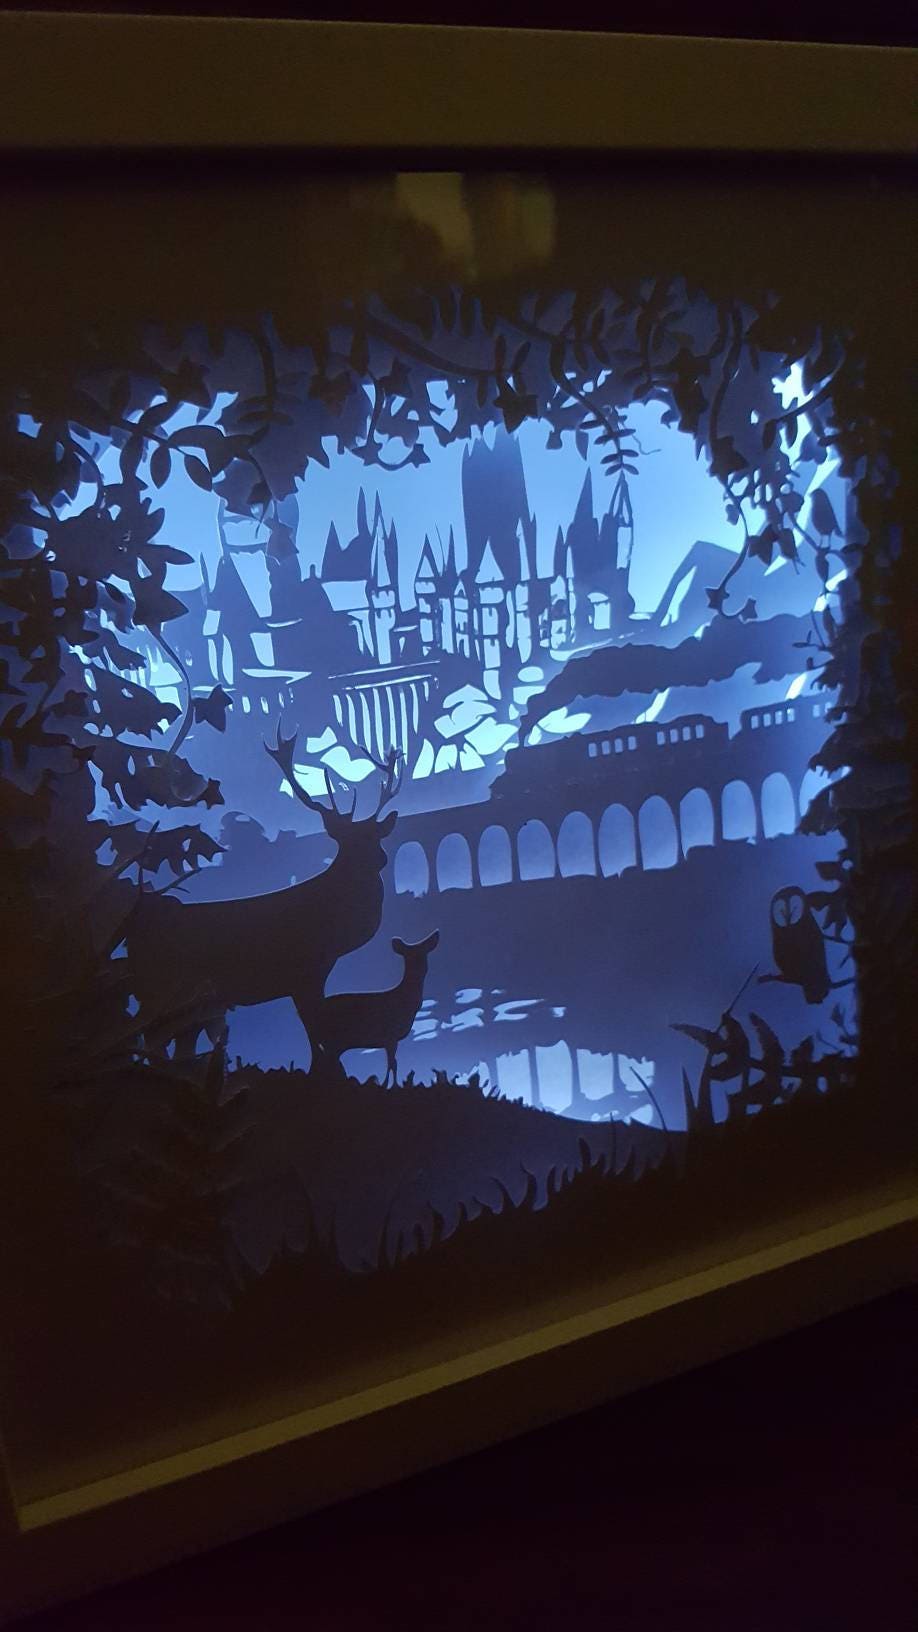 Download Welcome to Hogwarts.... Harry Potter inspired Light up ...